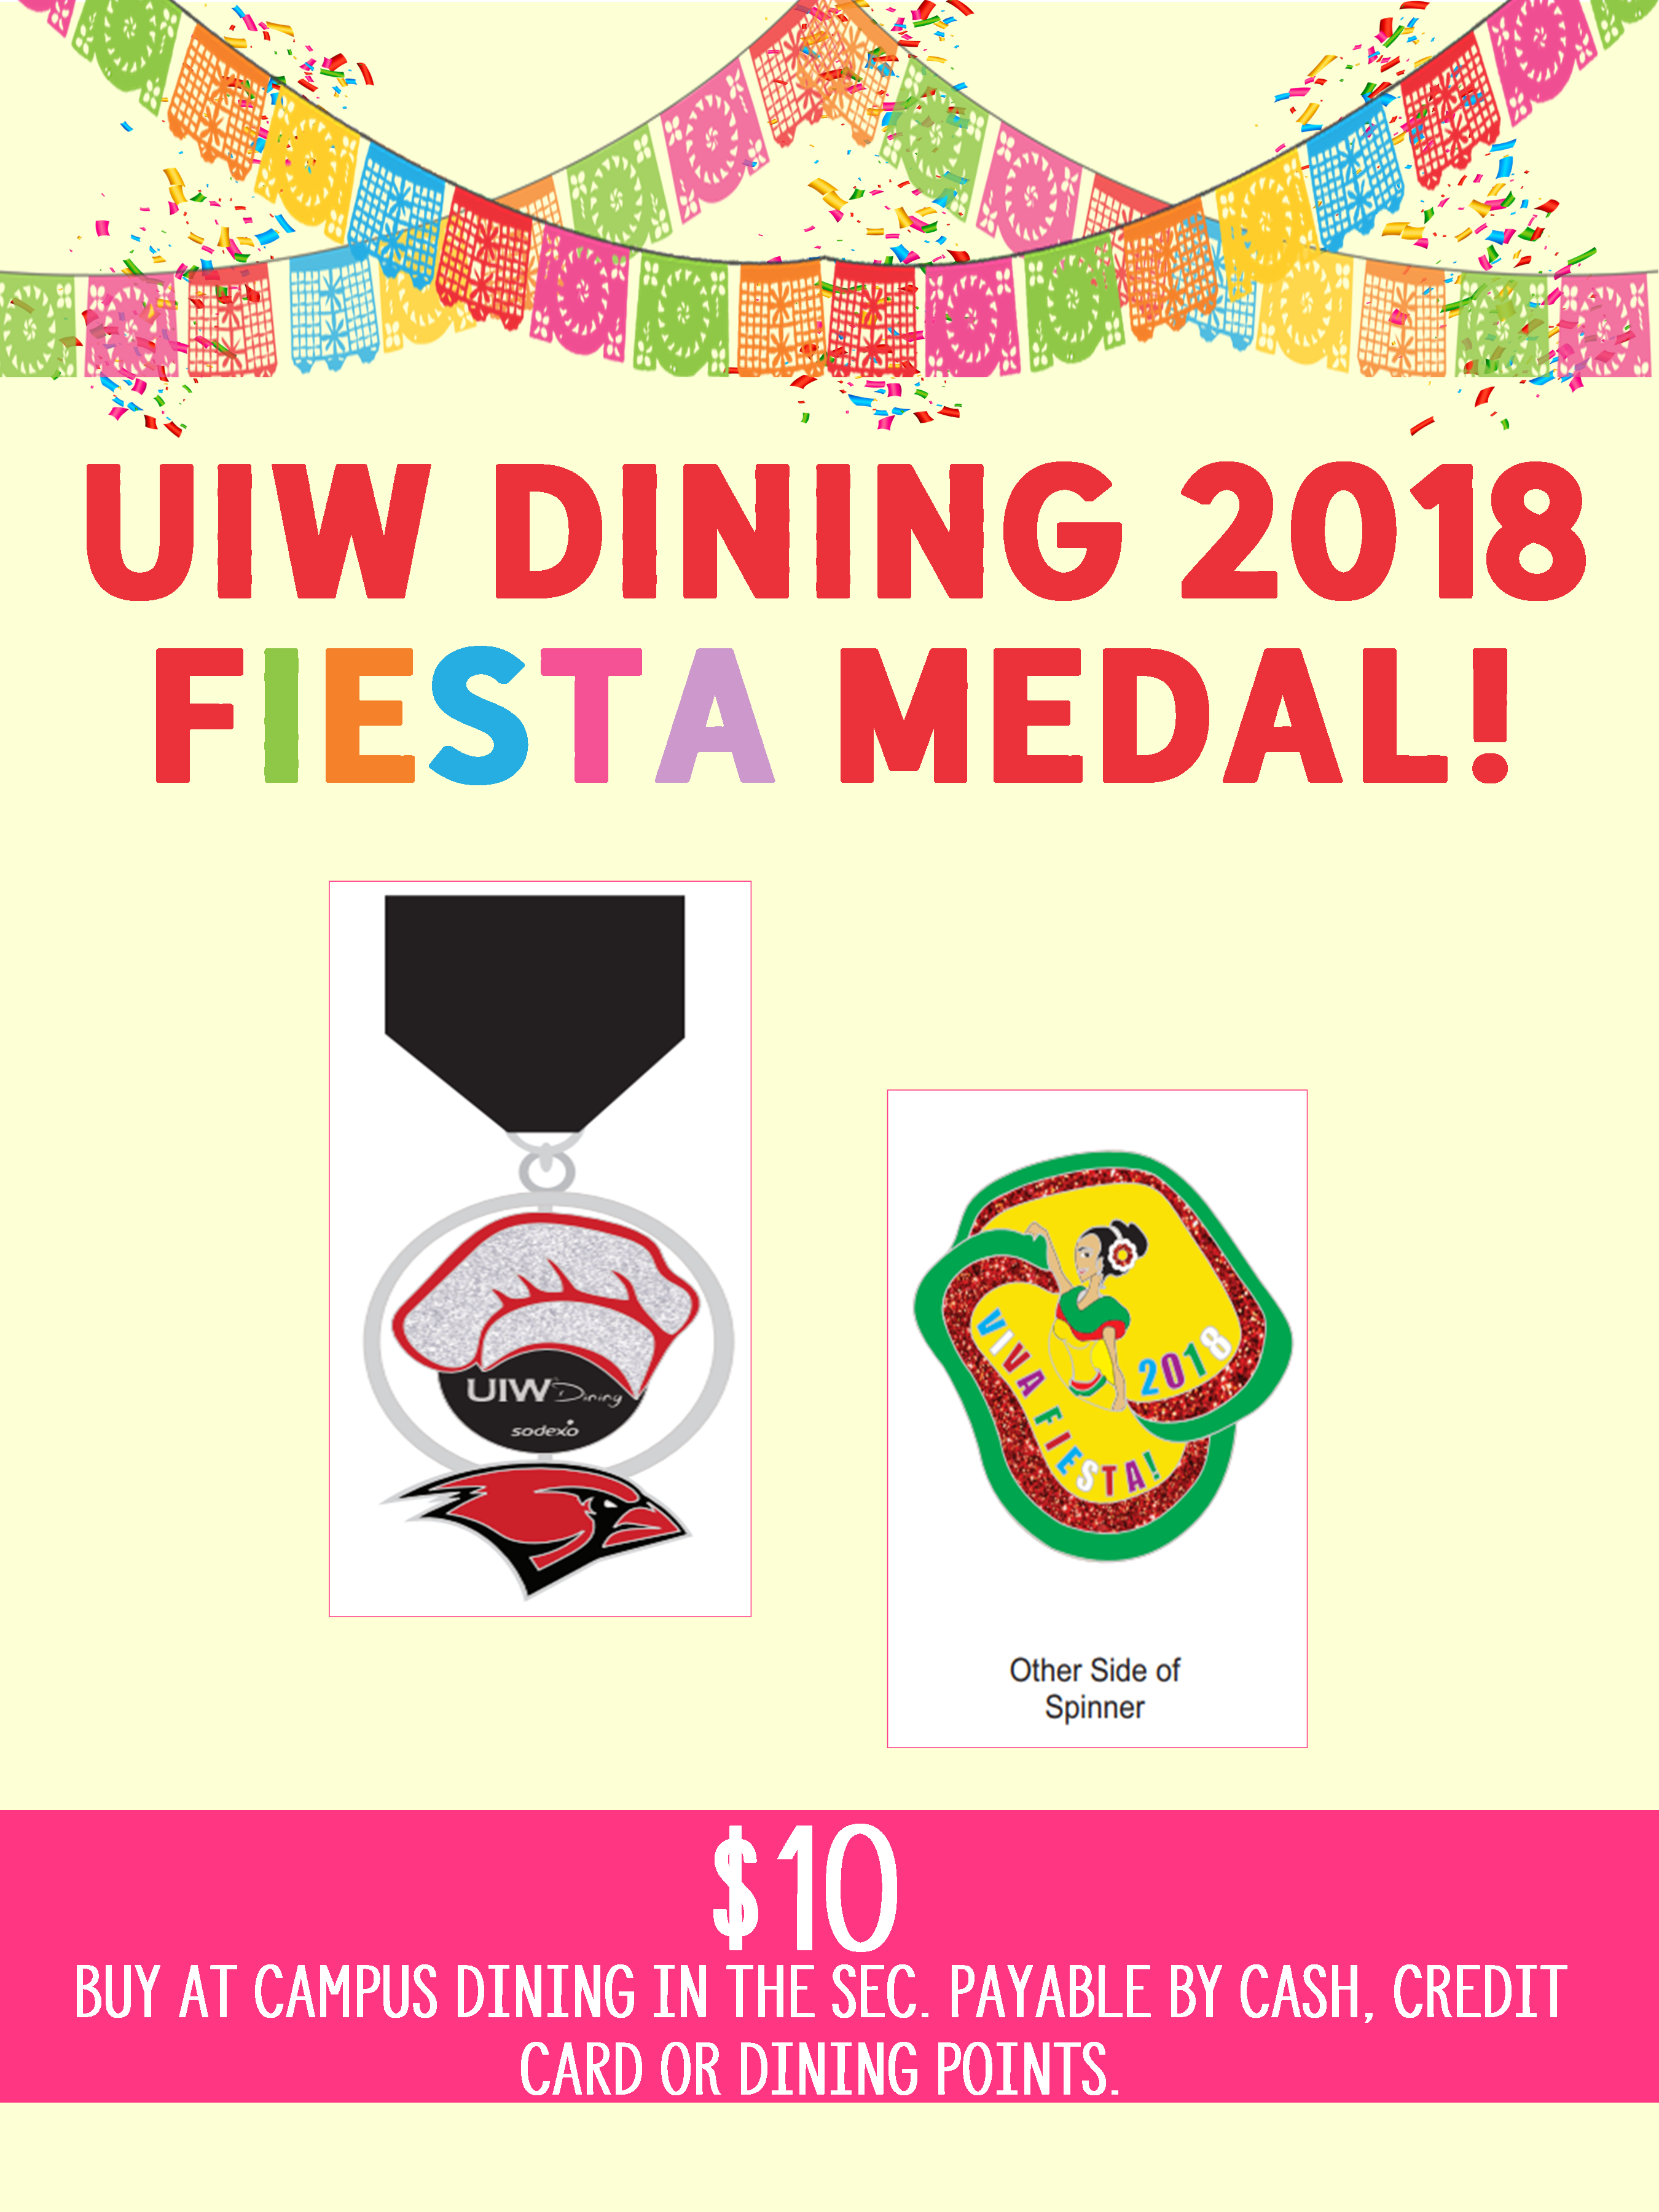 uiw campus dining fiesta medal 2018